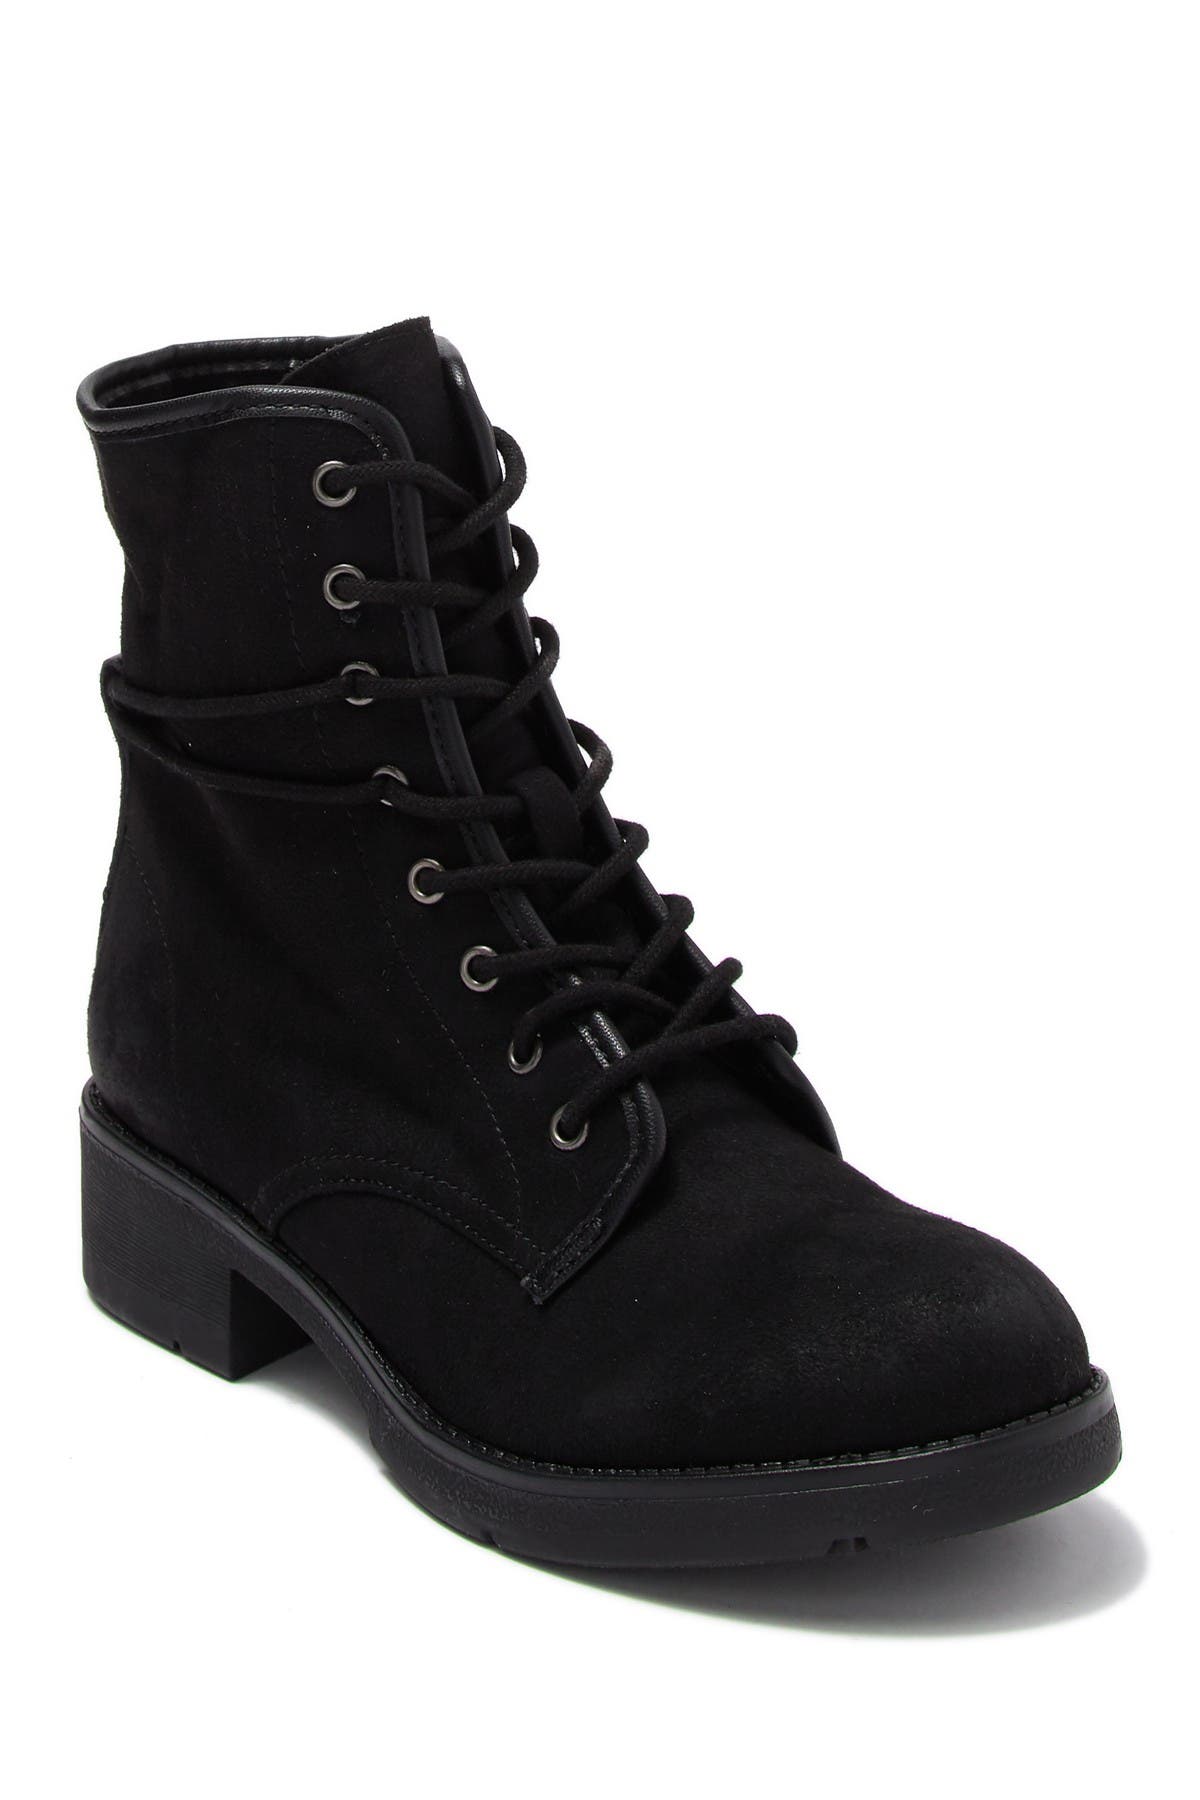 candies lace up boots